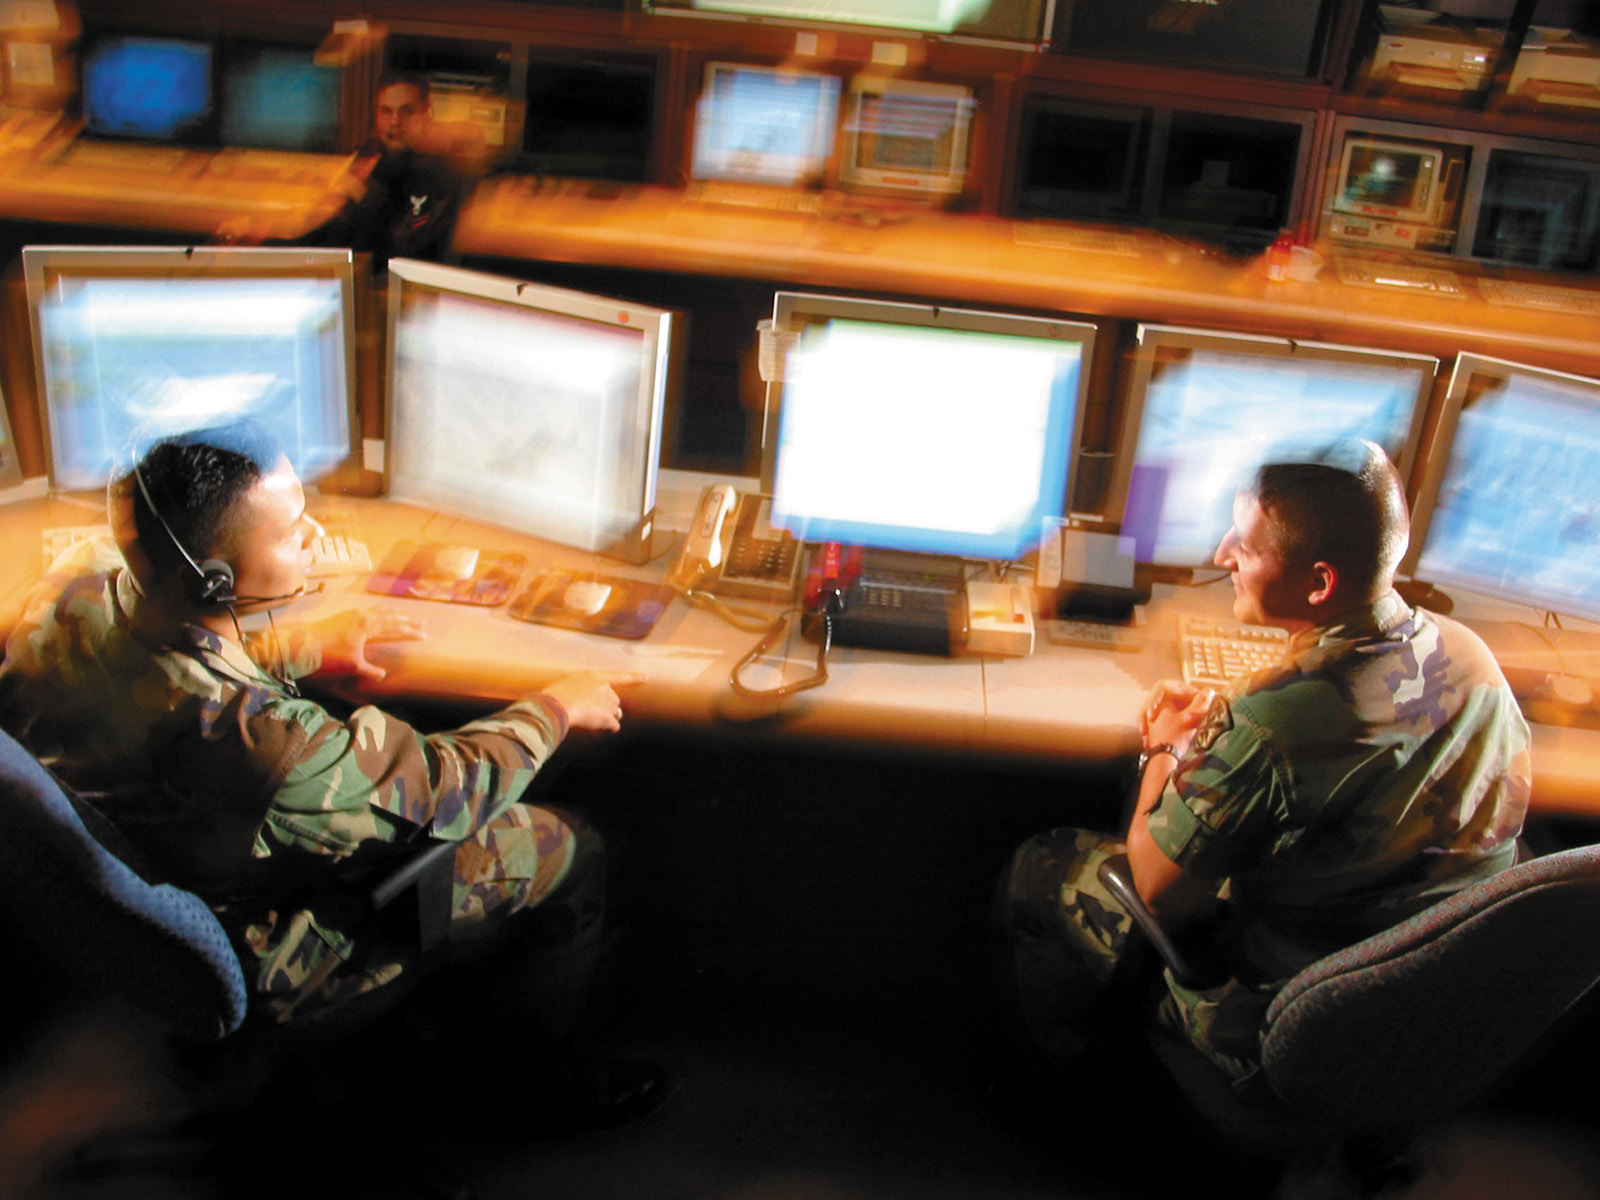 Staffers at the National Security Agency, Fort Meade, Maryland, October 2002